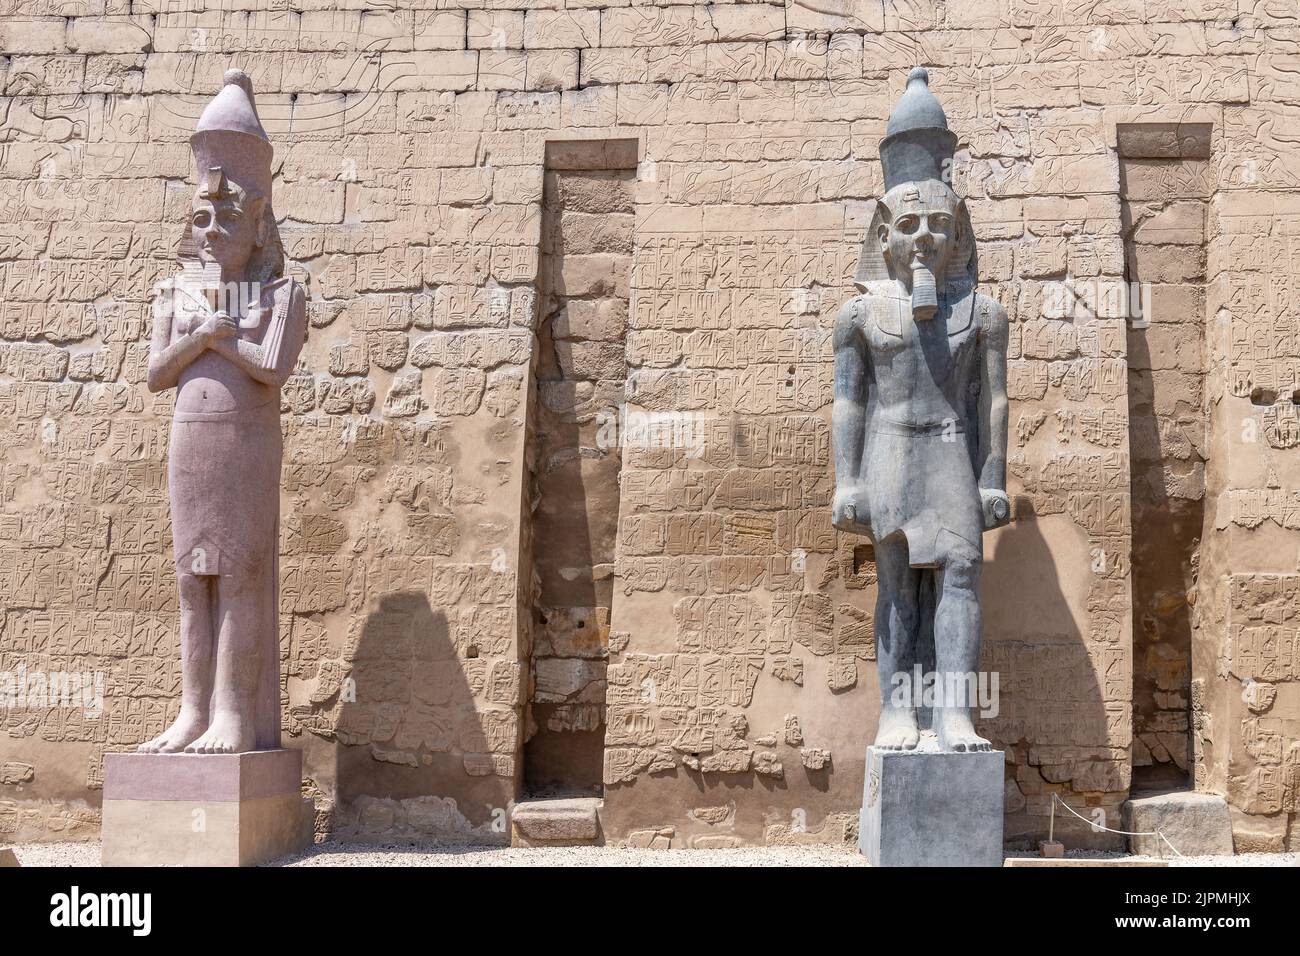 Luxor, Egypt; August 17, 2022 - A couple of statues of the pharaoh Ramses II at the Luxor Temple, Egypt. Stock Photo